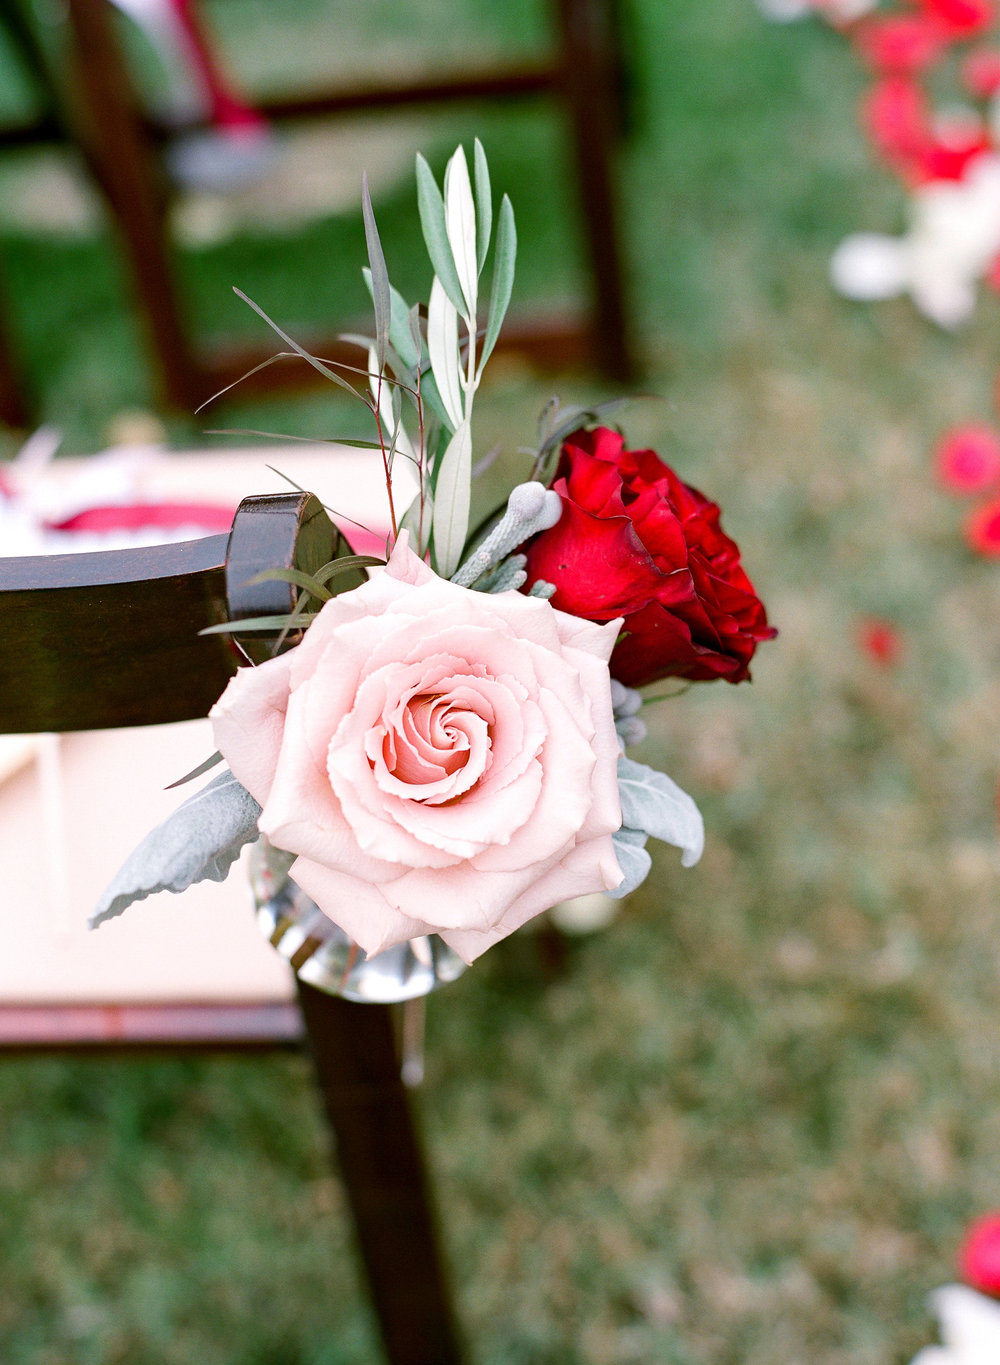 Amador_County_Wedding_Aisle_Arrangements_Roses_Pink_Red_Northern_California.jpg